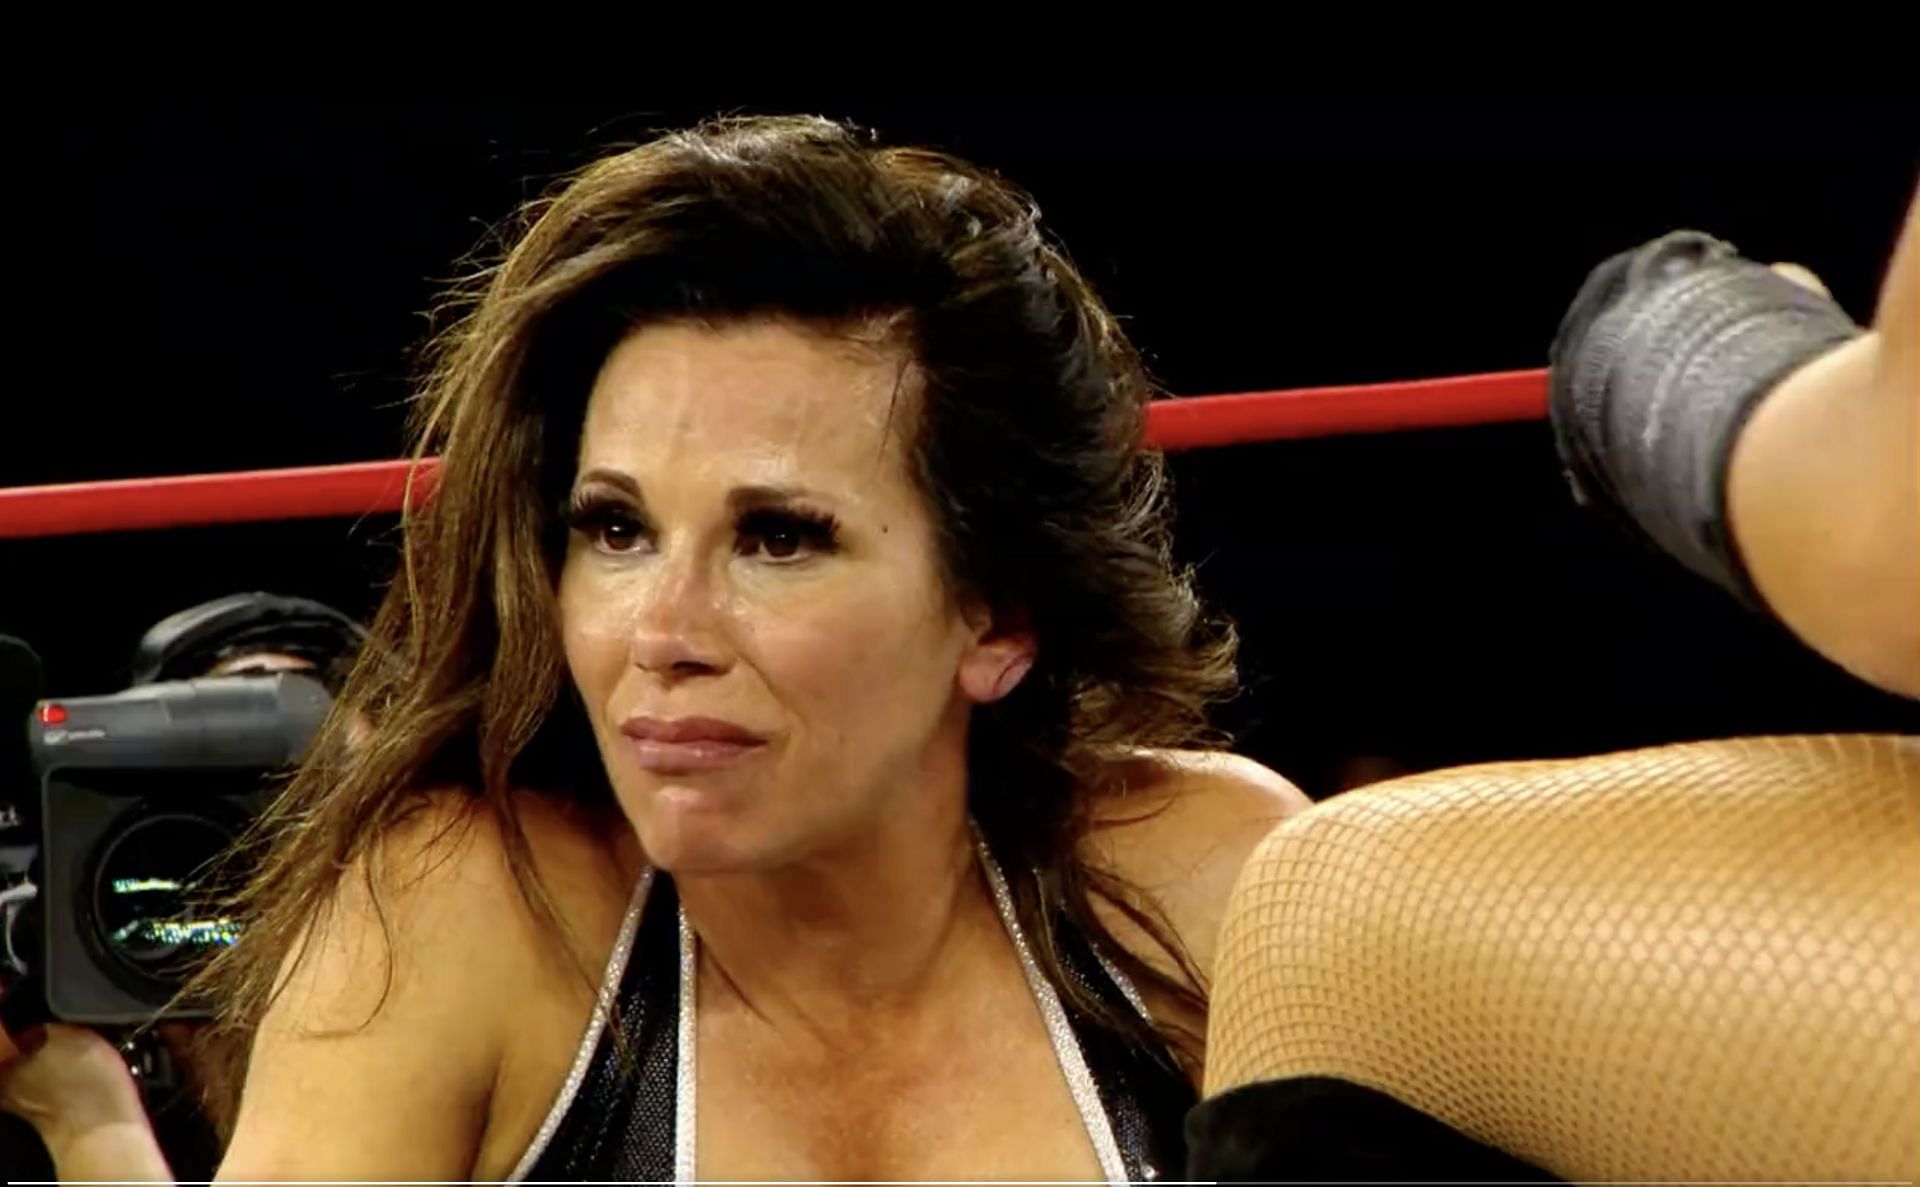 Chelsea Green turns on Mickie James on IMPACT Wrestling